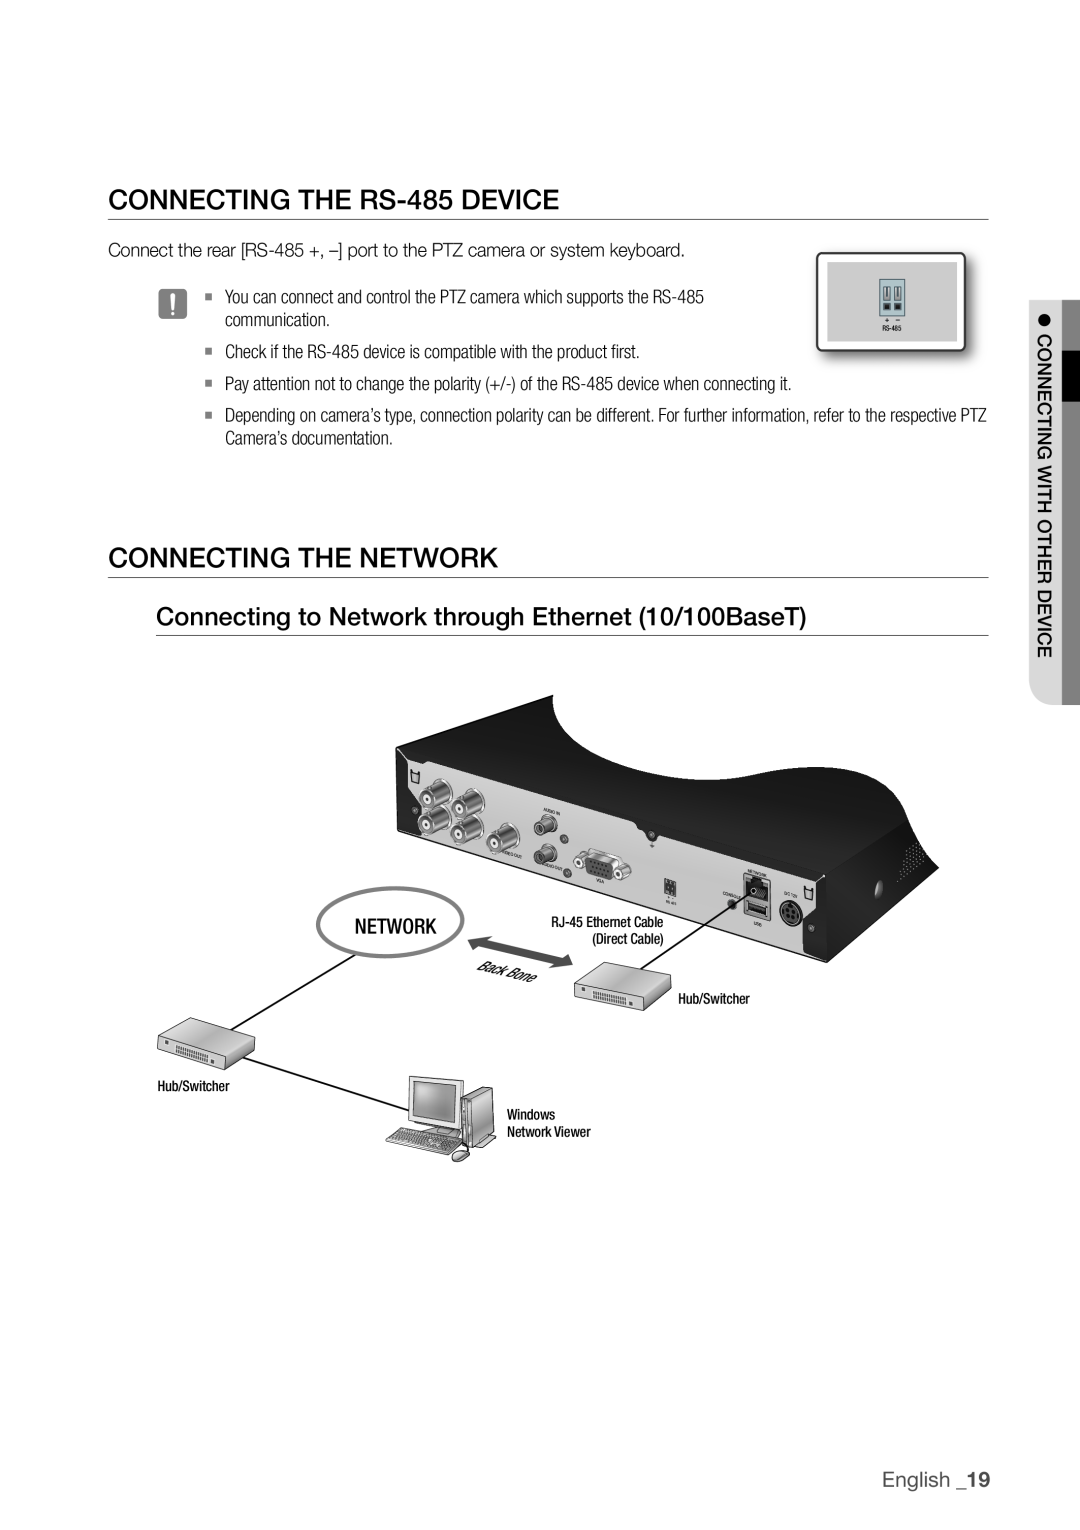 Samsung SDR3100 user manual ConneCTinG The rS-485deviCe, ConneCTinG The neTworK, English _19 